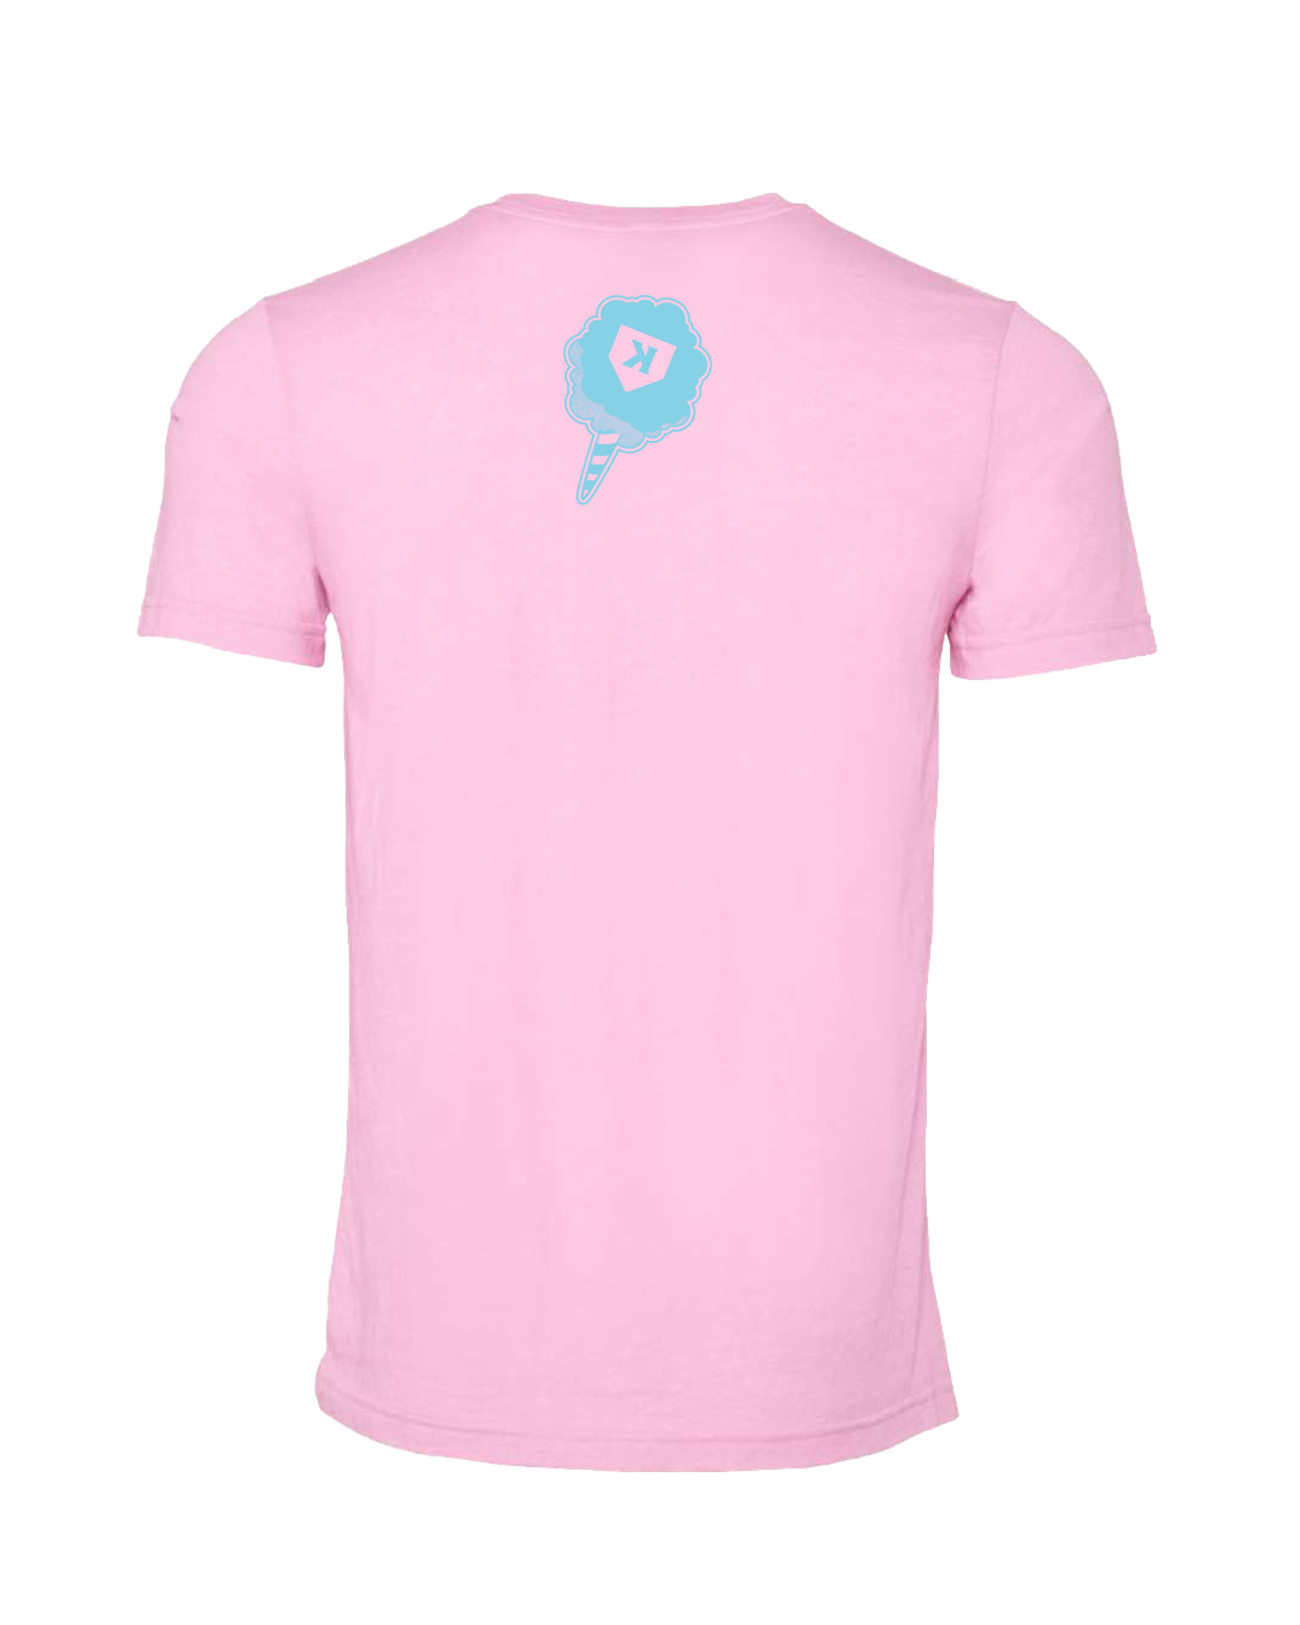 Cotton Candy Pink Tee